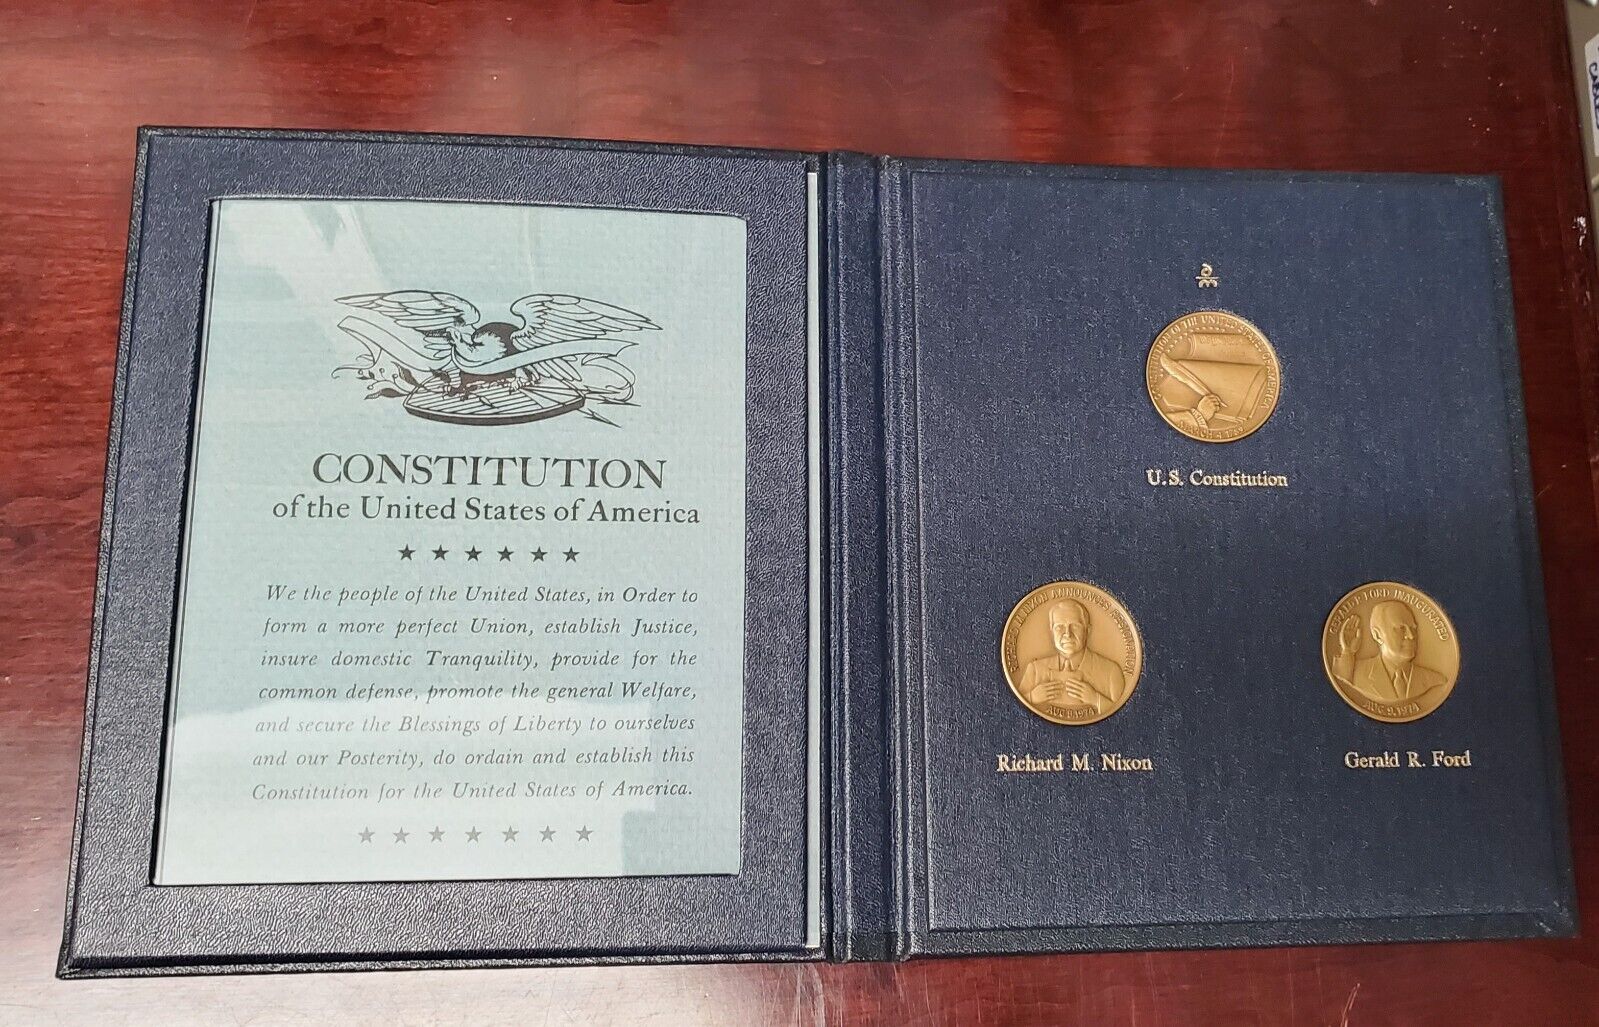 Danbury Mint Democracy In Action President 1974 - Ford, Nixon, and Constitution